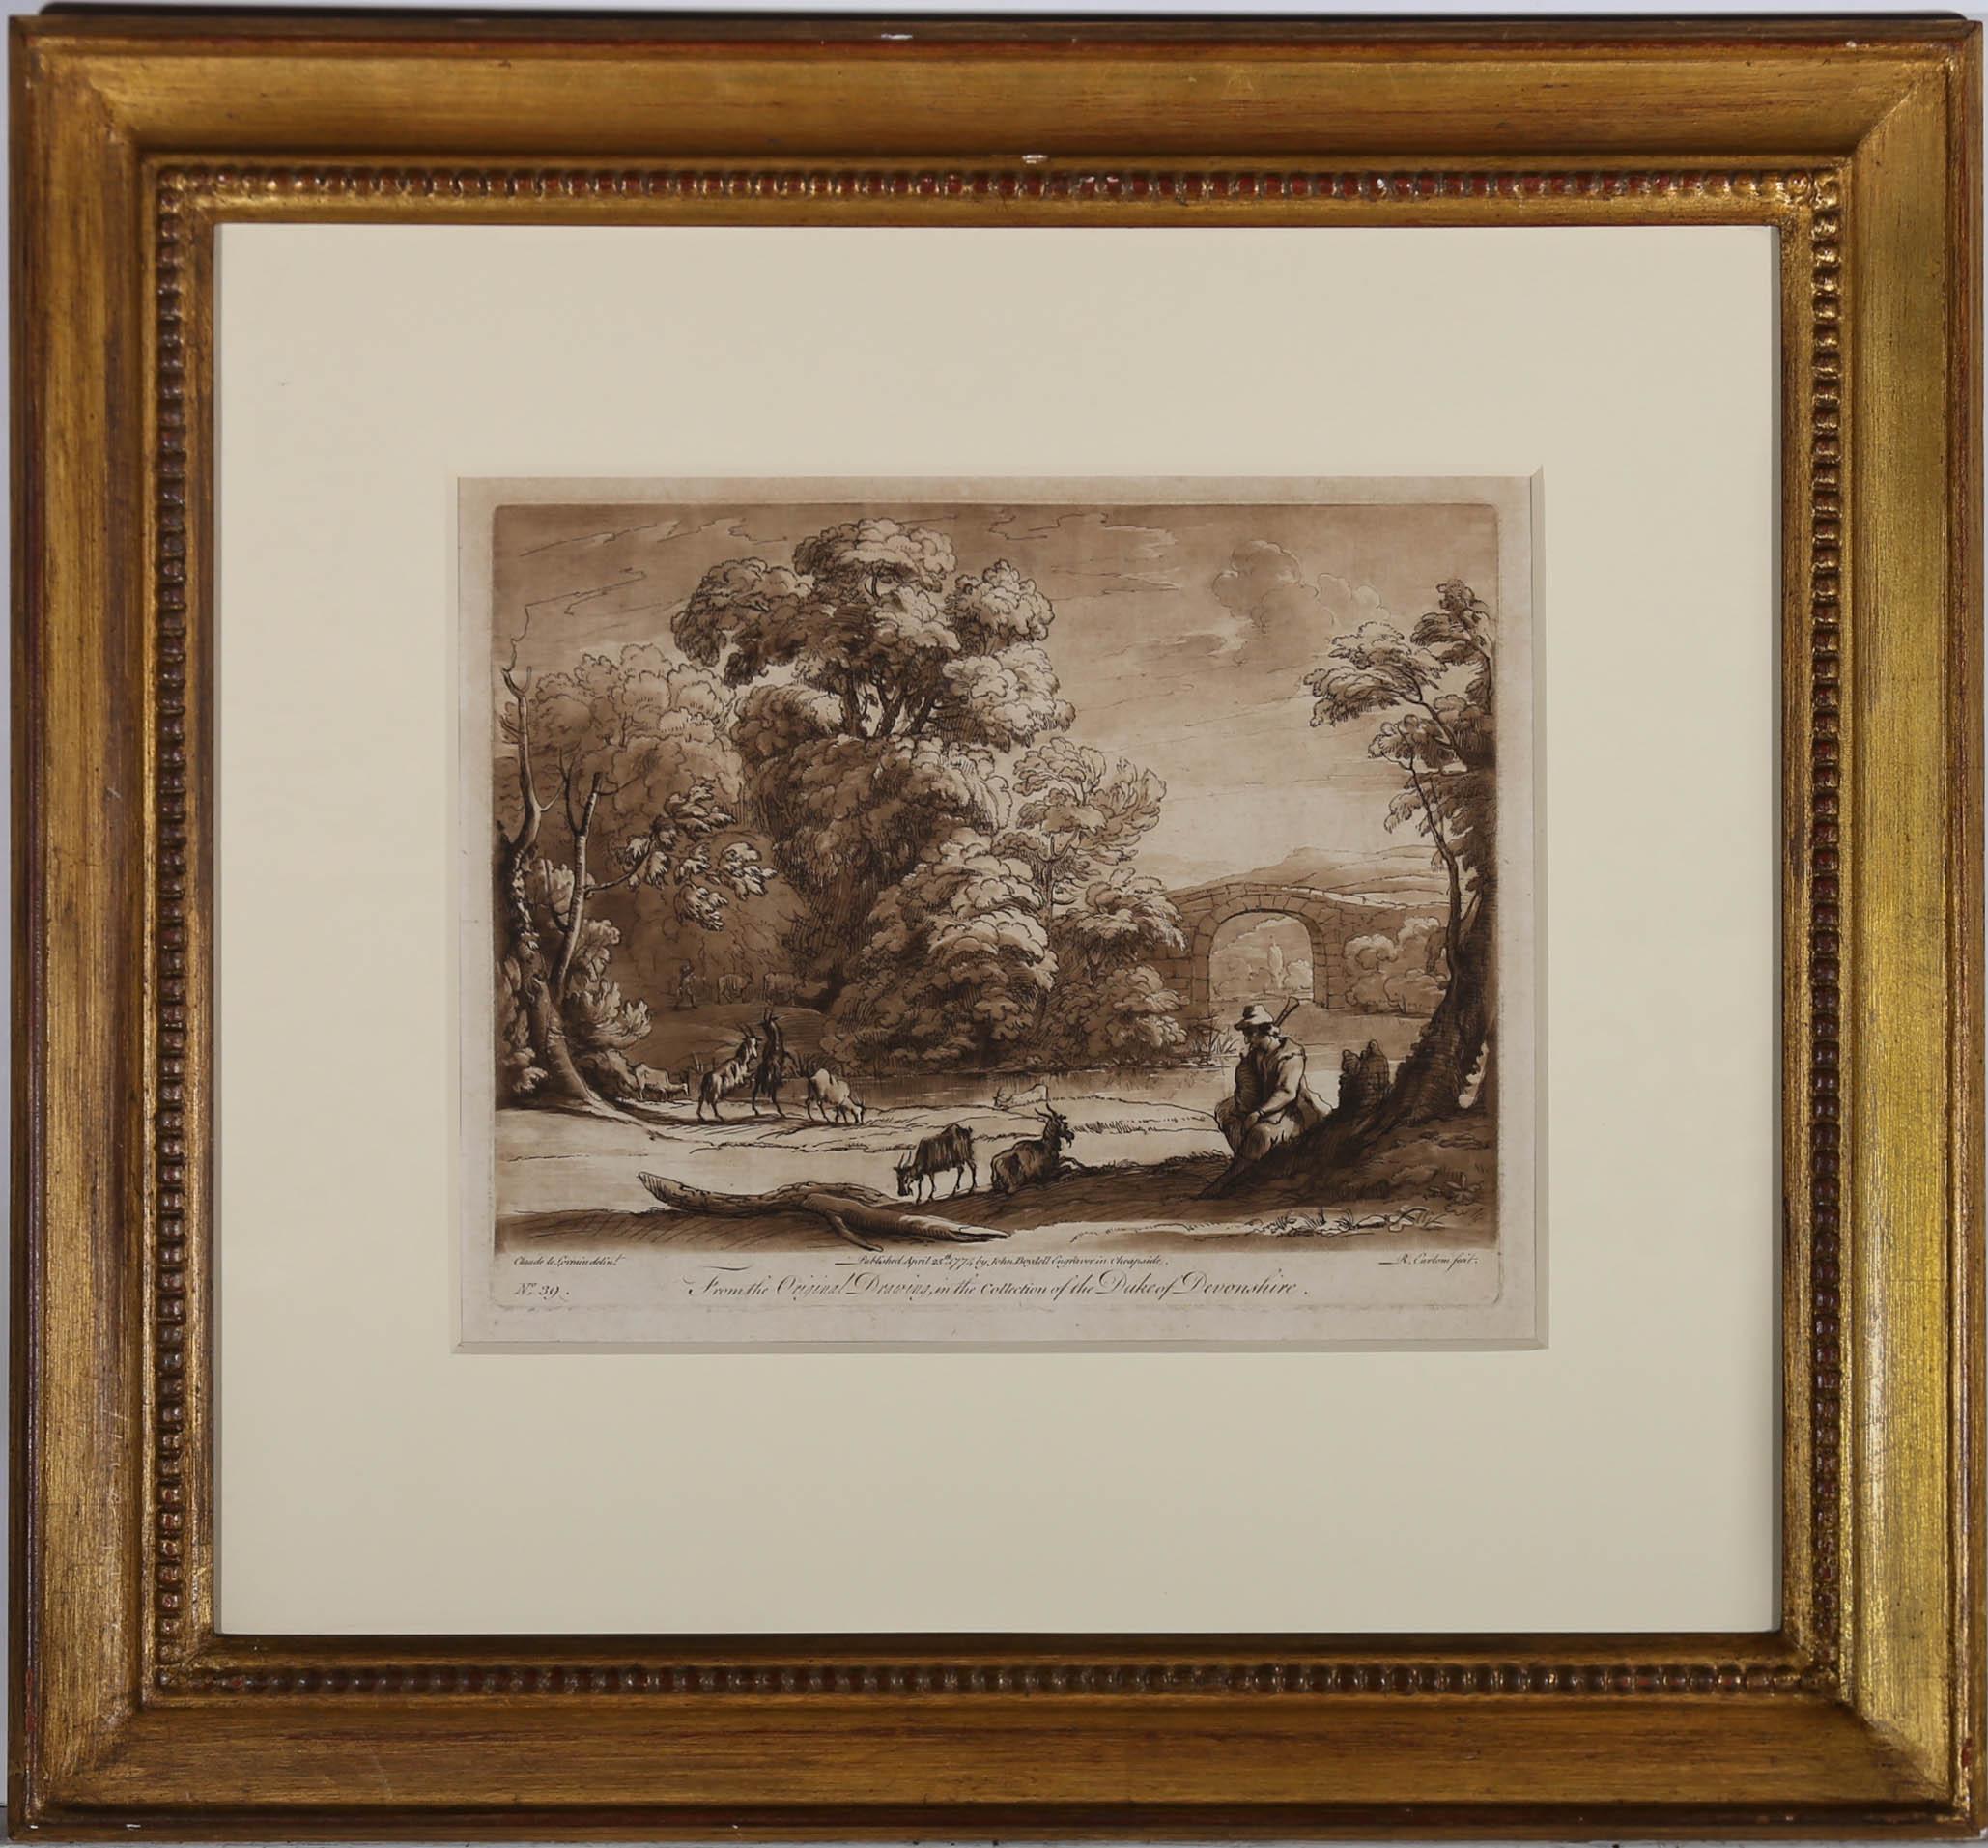 A fine 1774 etching with mezzotint in sepia tones by Richard Earlom (1743-1822) after Claude Lorrain (1600-1682) from the etched version of the Liber Veritatis published 1774-1777. It depicts a bucolic landscape with a traveller and a herd of goats,